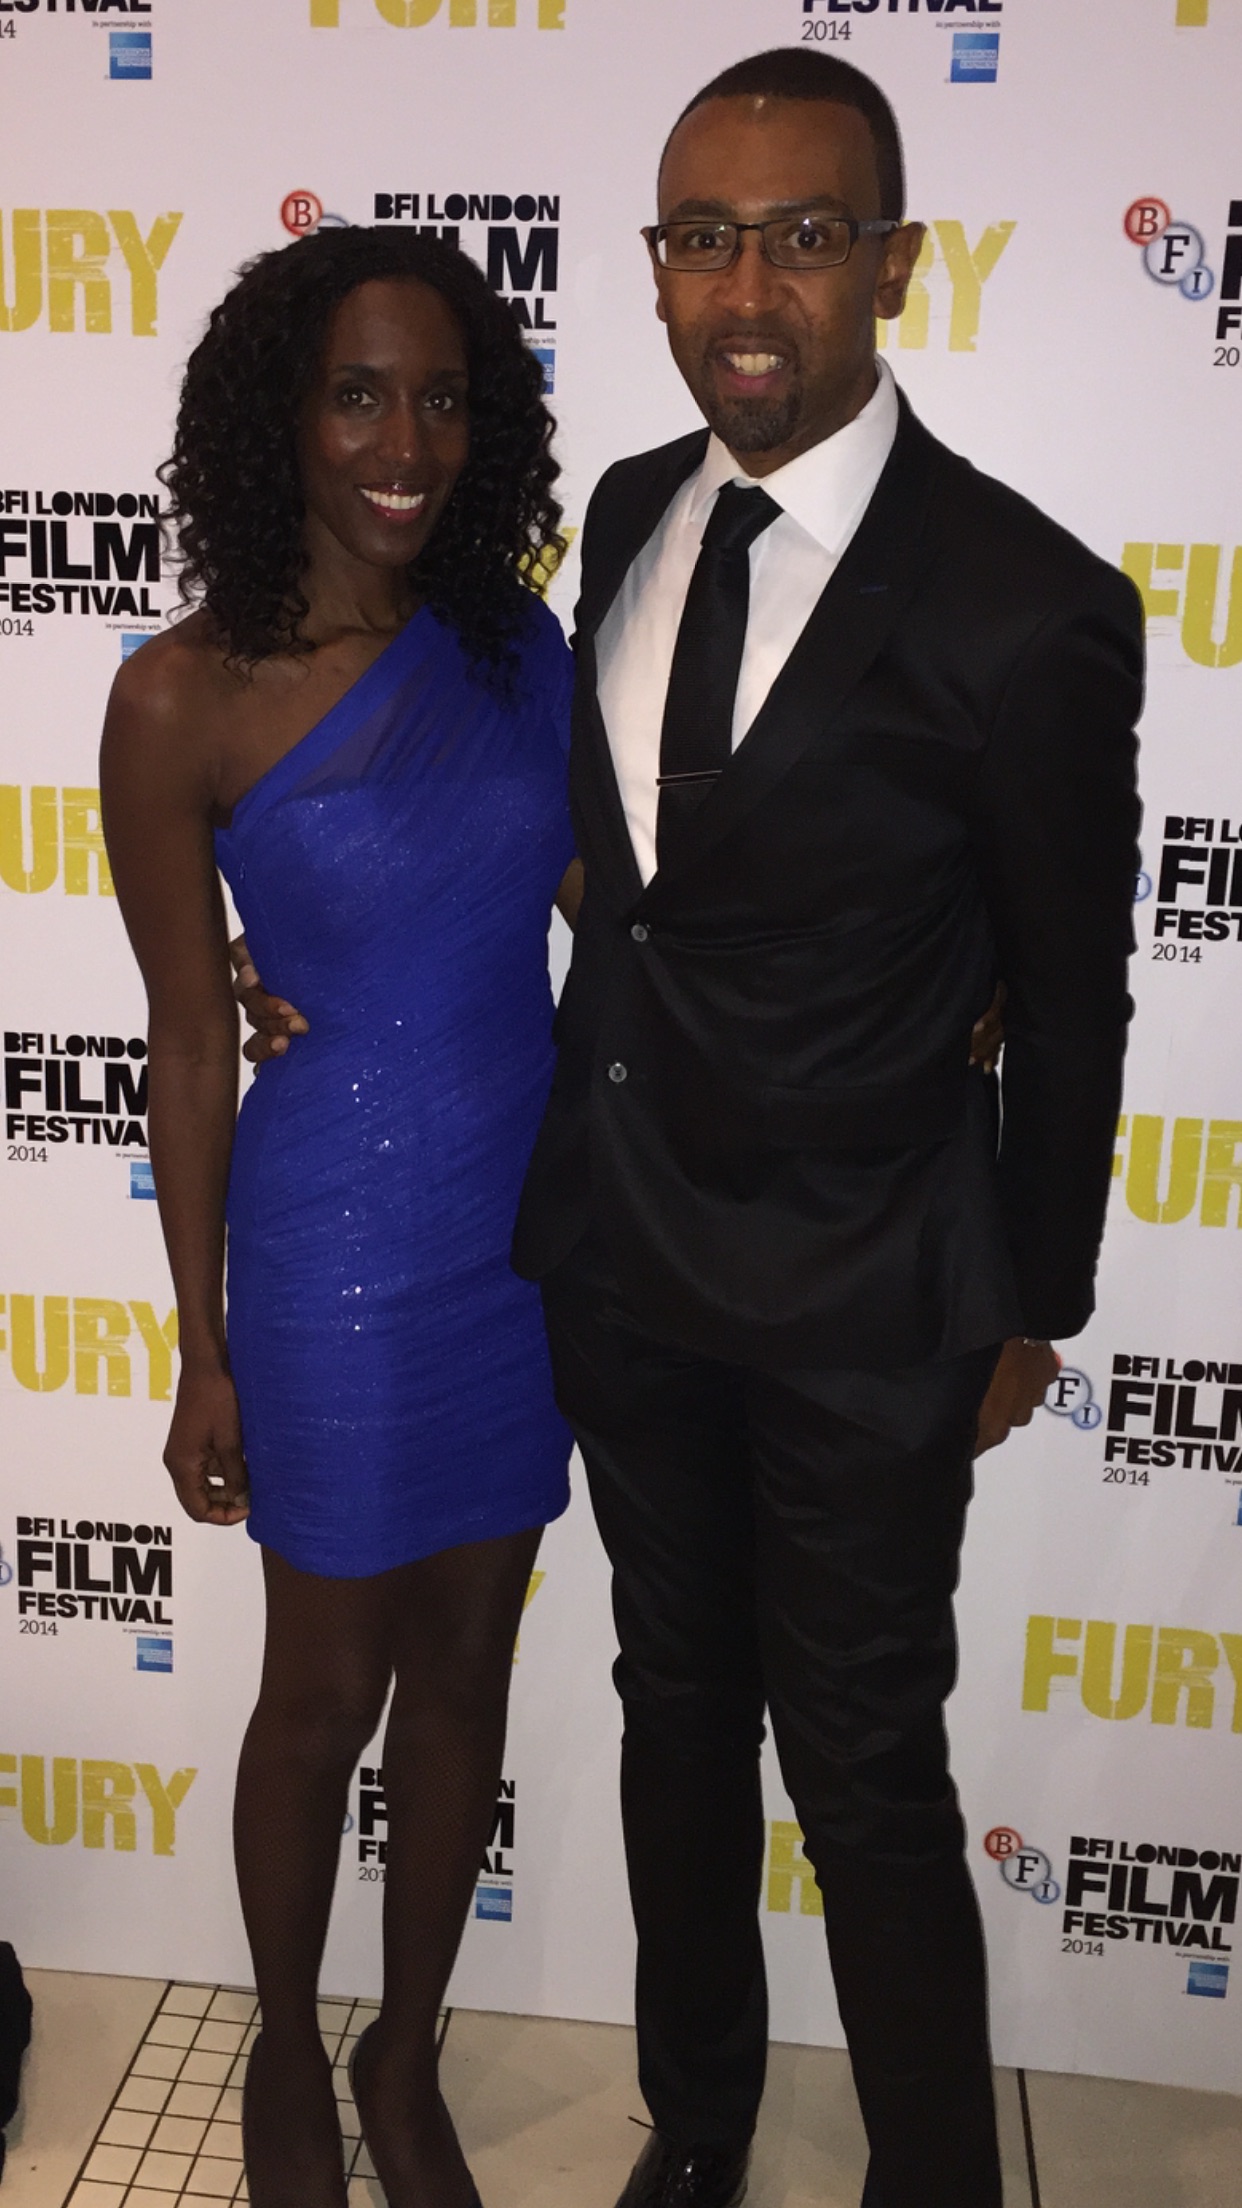 Paul Craig and his wife Marcia Fowlin at the premiere of 'Fury', the closing night film of the BFI London Film Festival 2014